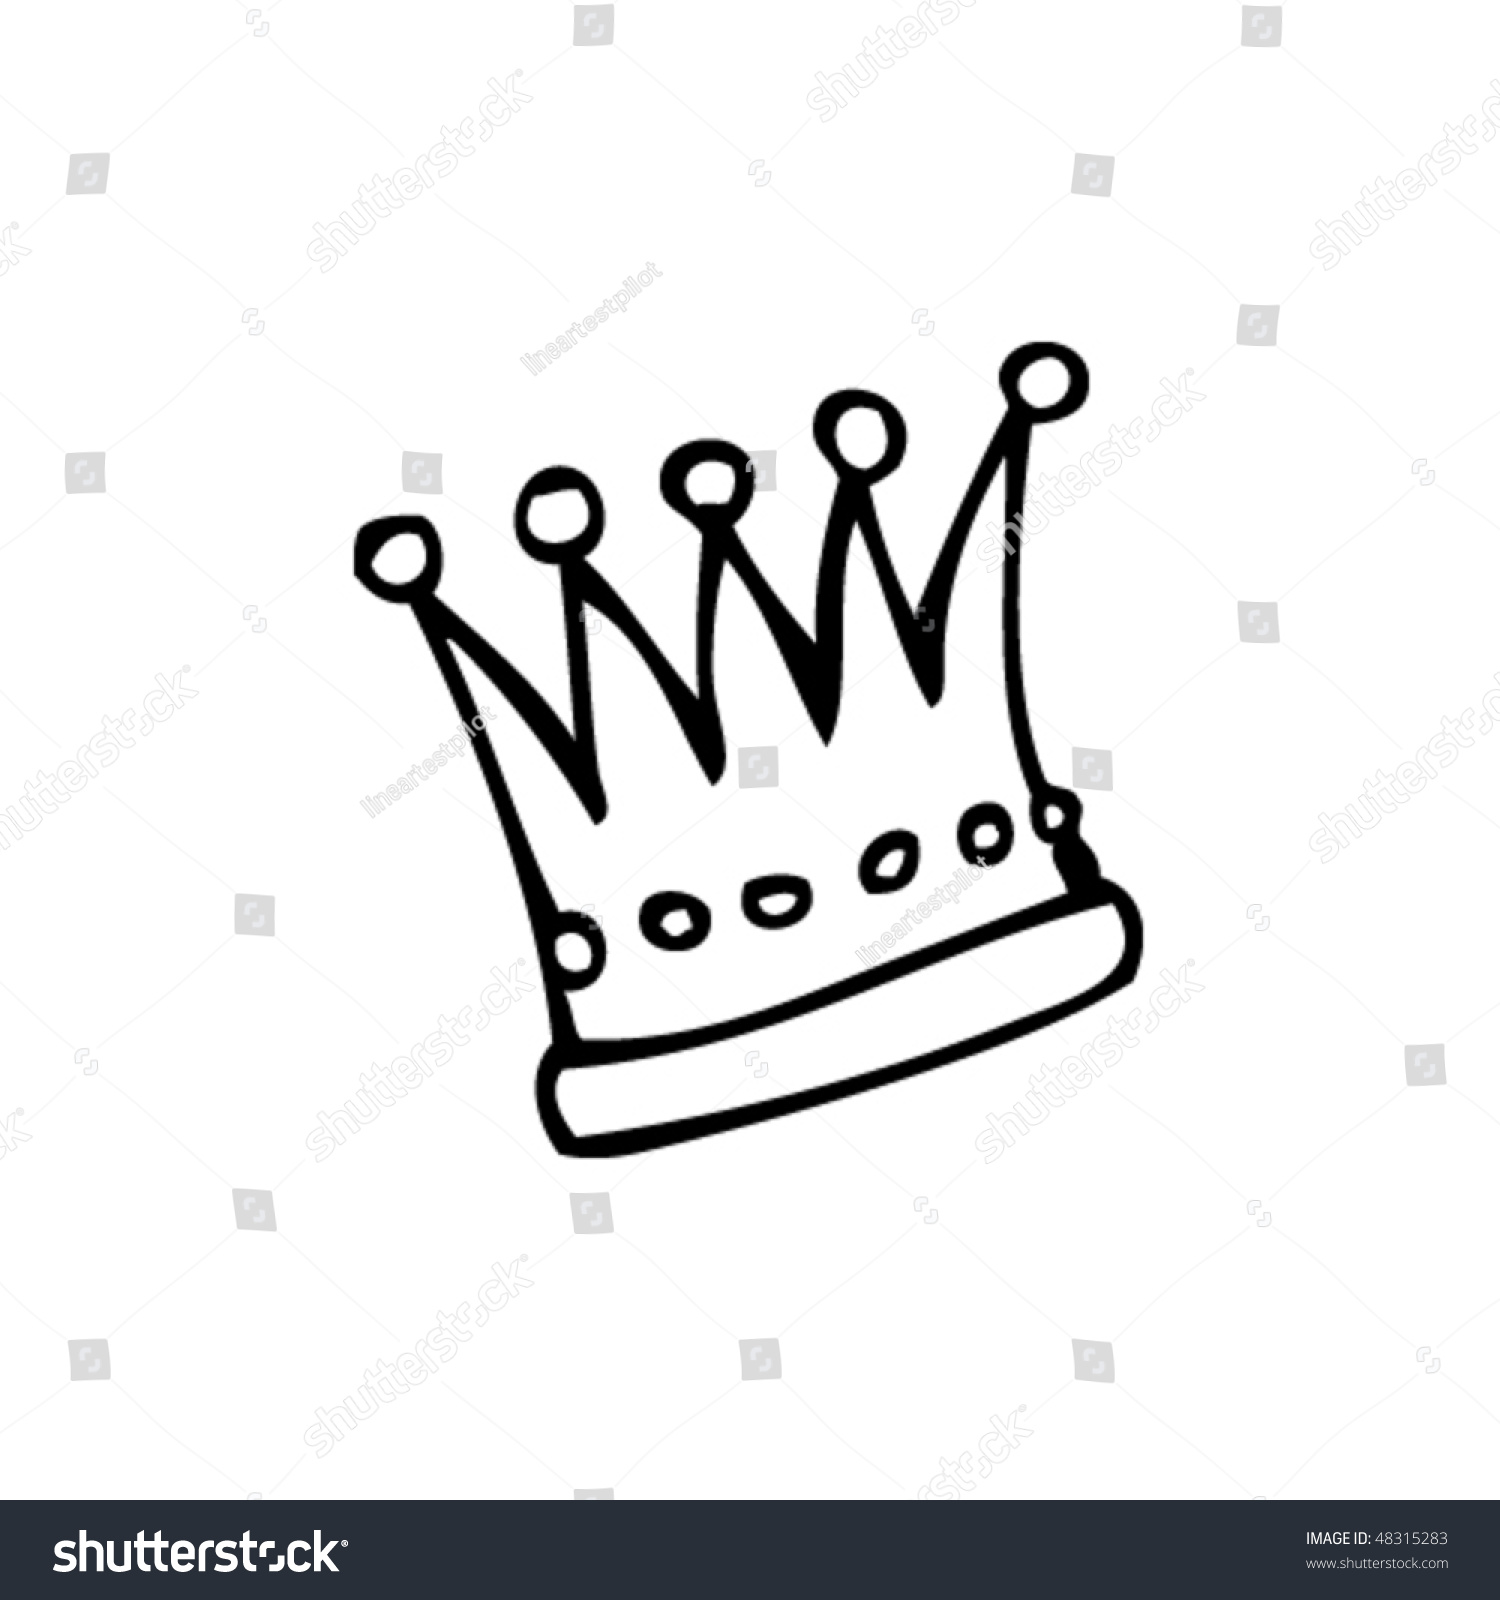 Drawing Of A Crown Stock Vector Illustration 48315283 : Shutterstock